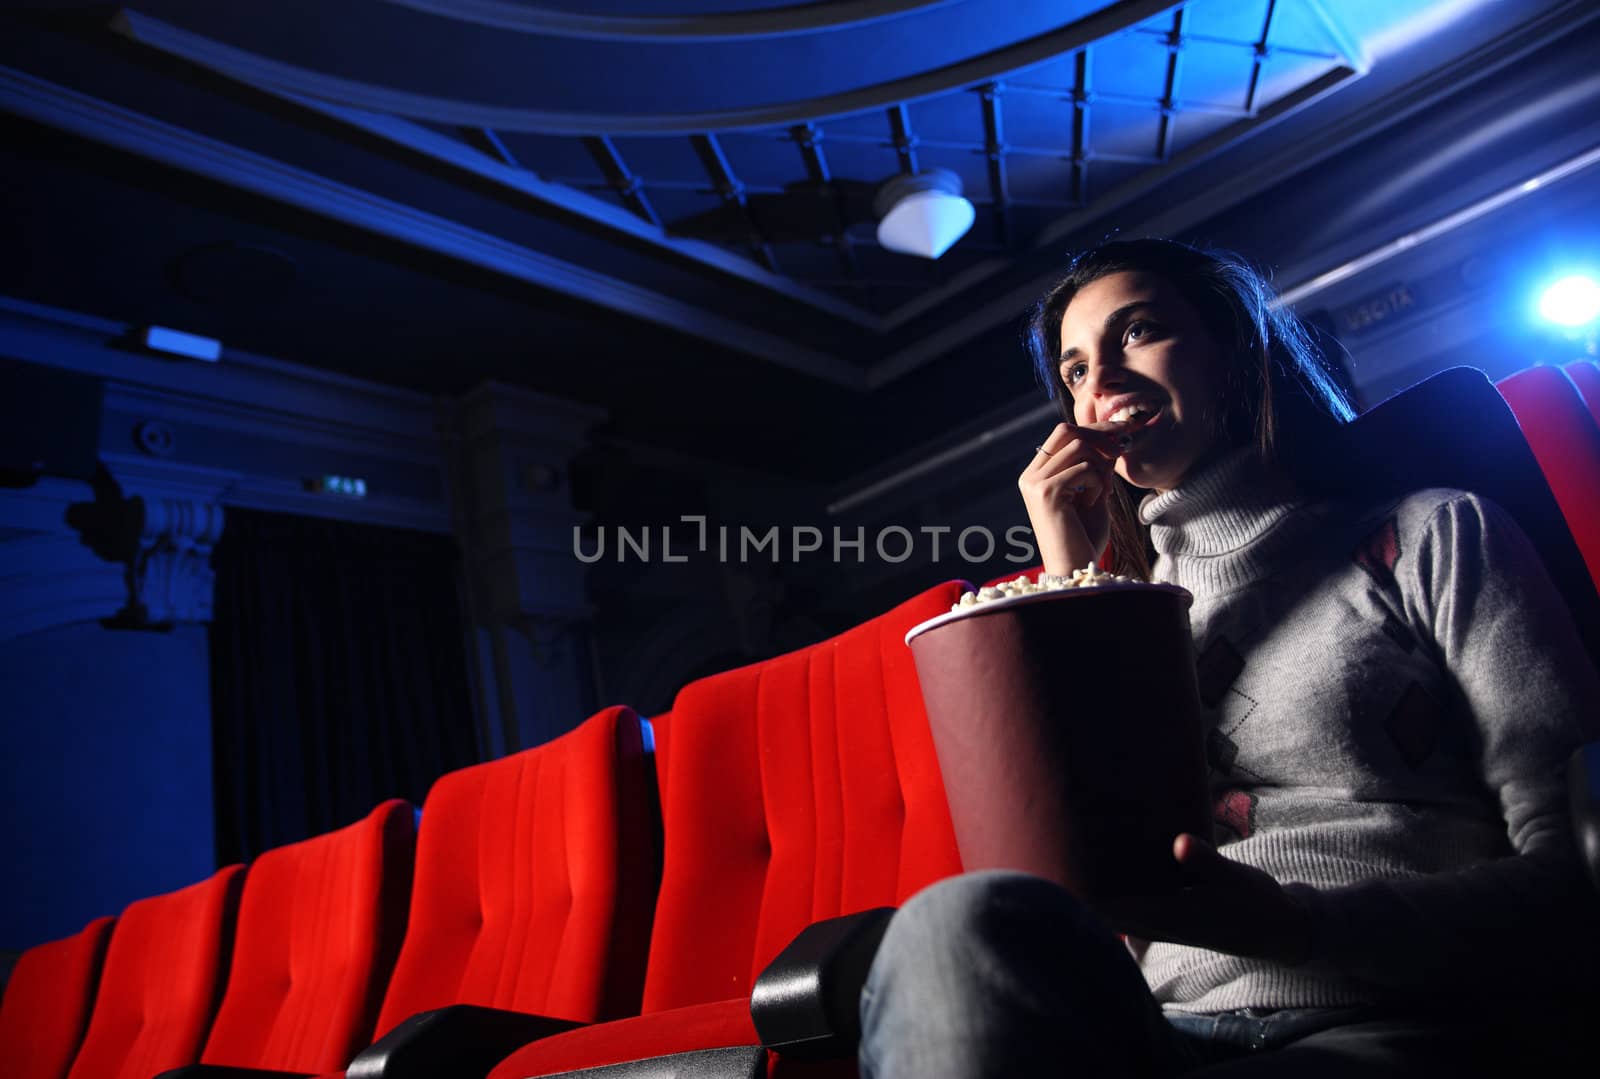 a pretty young woman sitting in an empty theater, she eats popco by stokkete